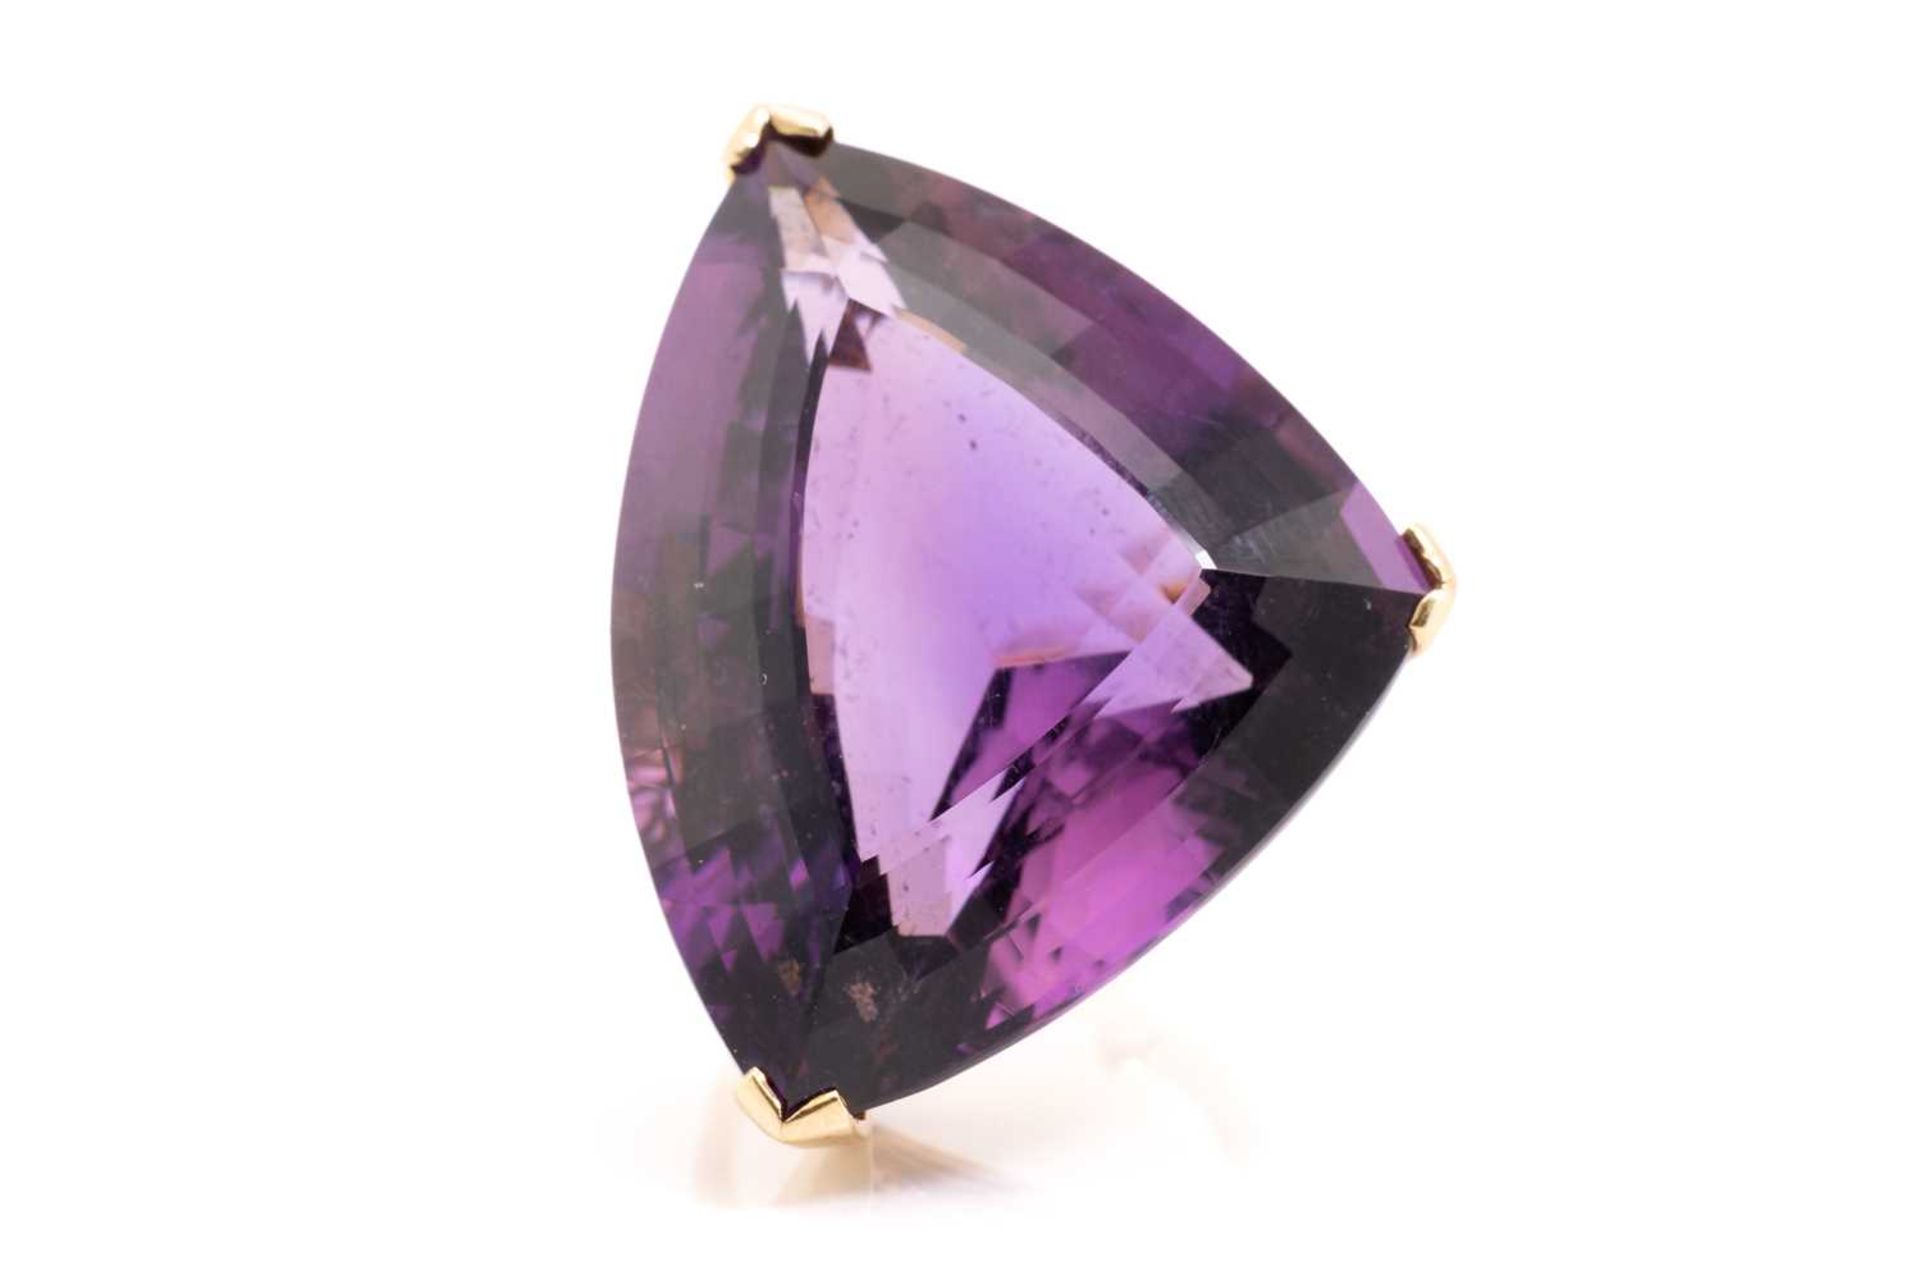 A large amethyst cocktail ring, featuring a trillion-cut amethyst of 32.6 x 25.7 x 14.7 mm, with